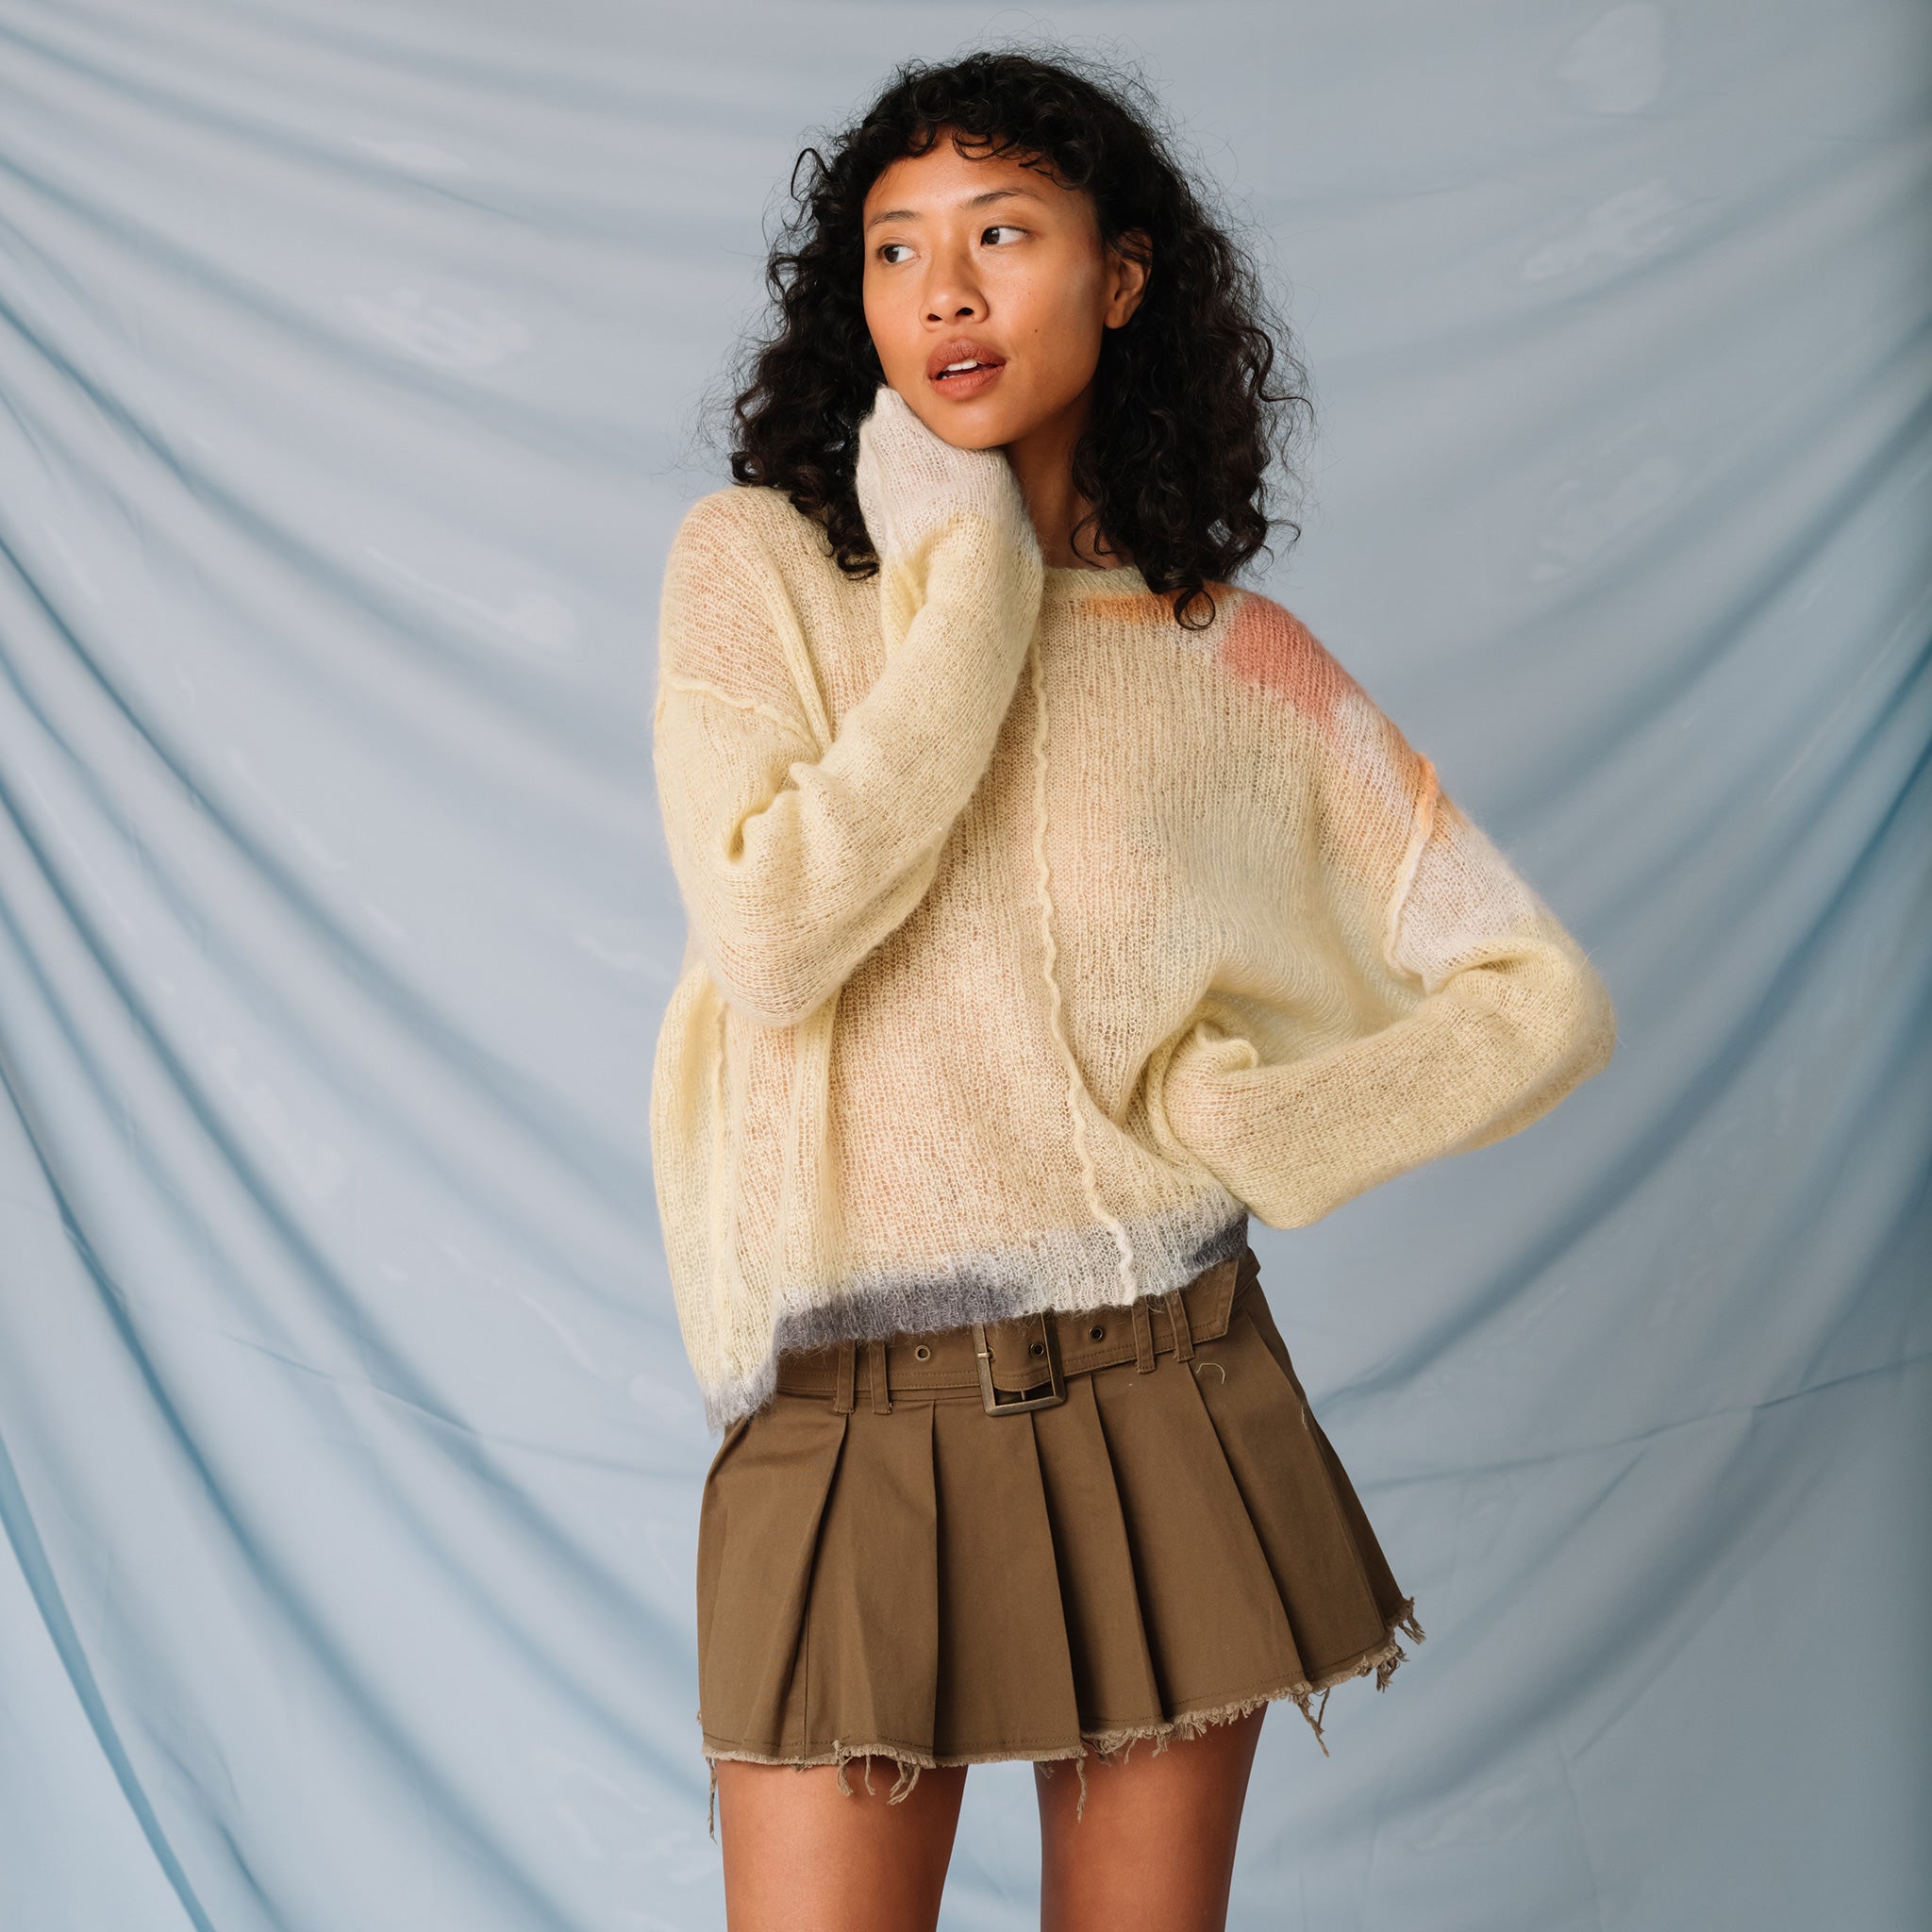 A model looks to the side while wearing the pale yellow Composition sweater by Eckhaus Latta, paired with a pleated mini skirt, front view.